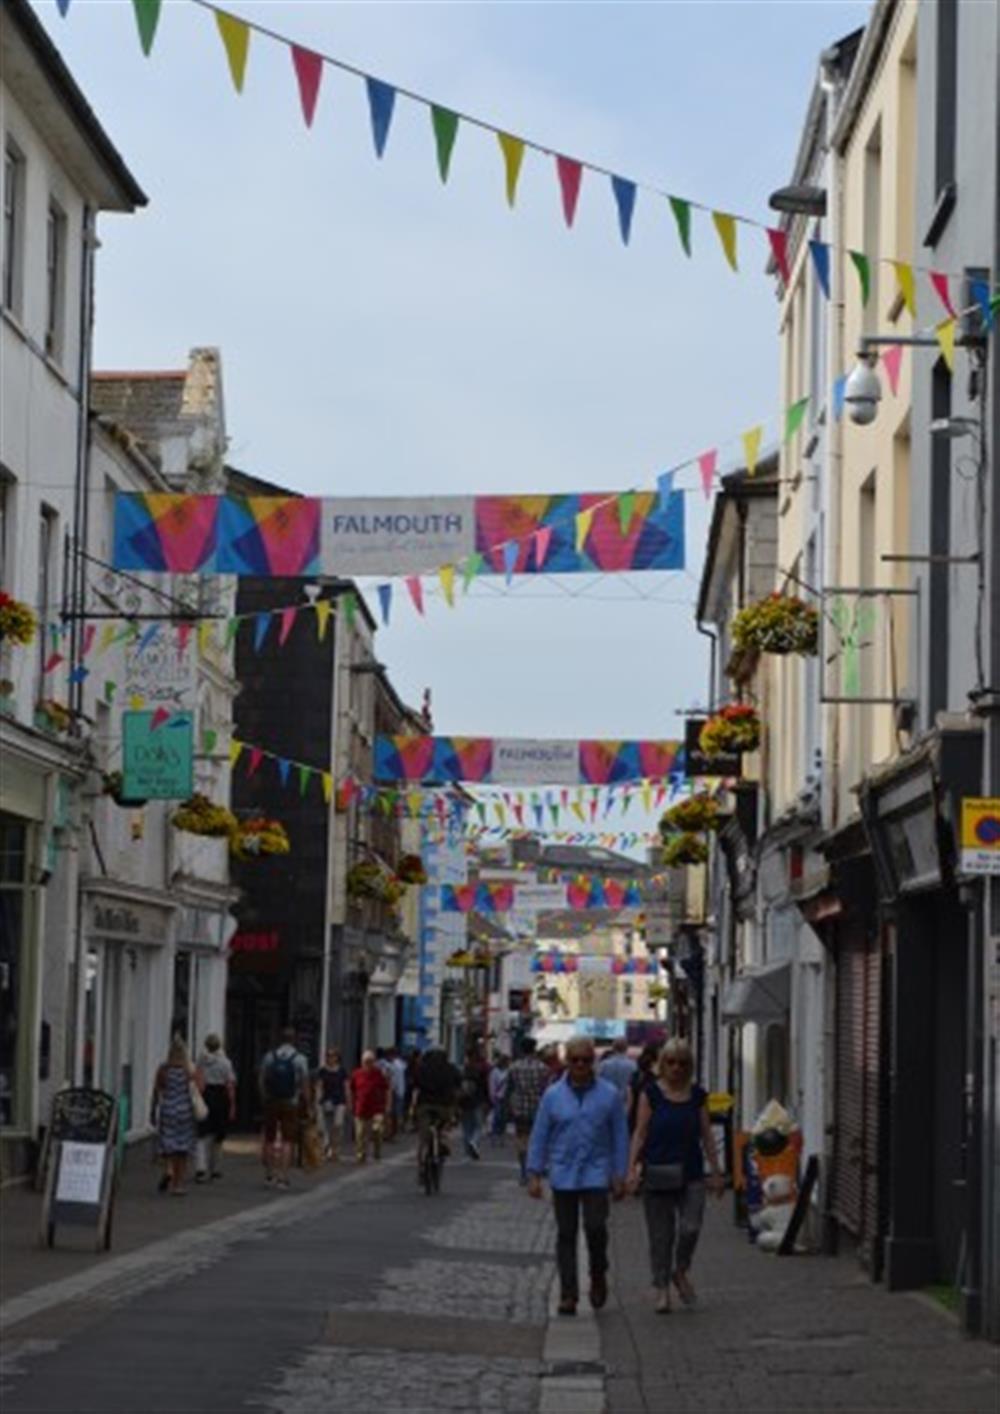 Falmouth town - great for all the usual shops, restaurants and art galleries.